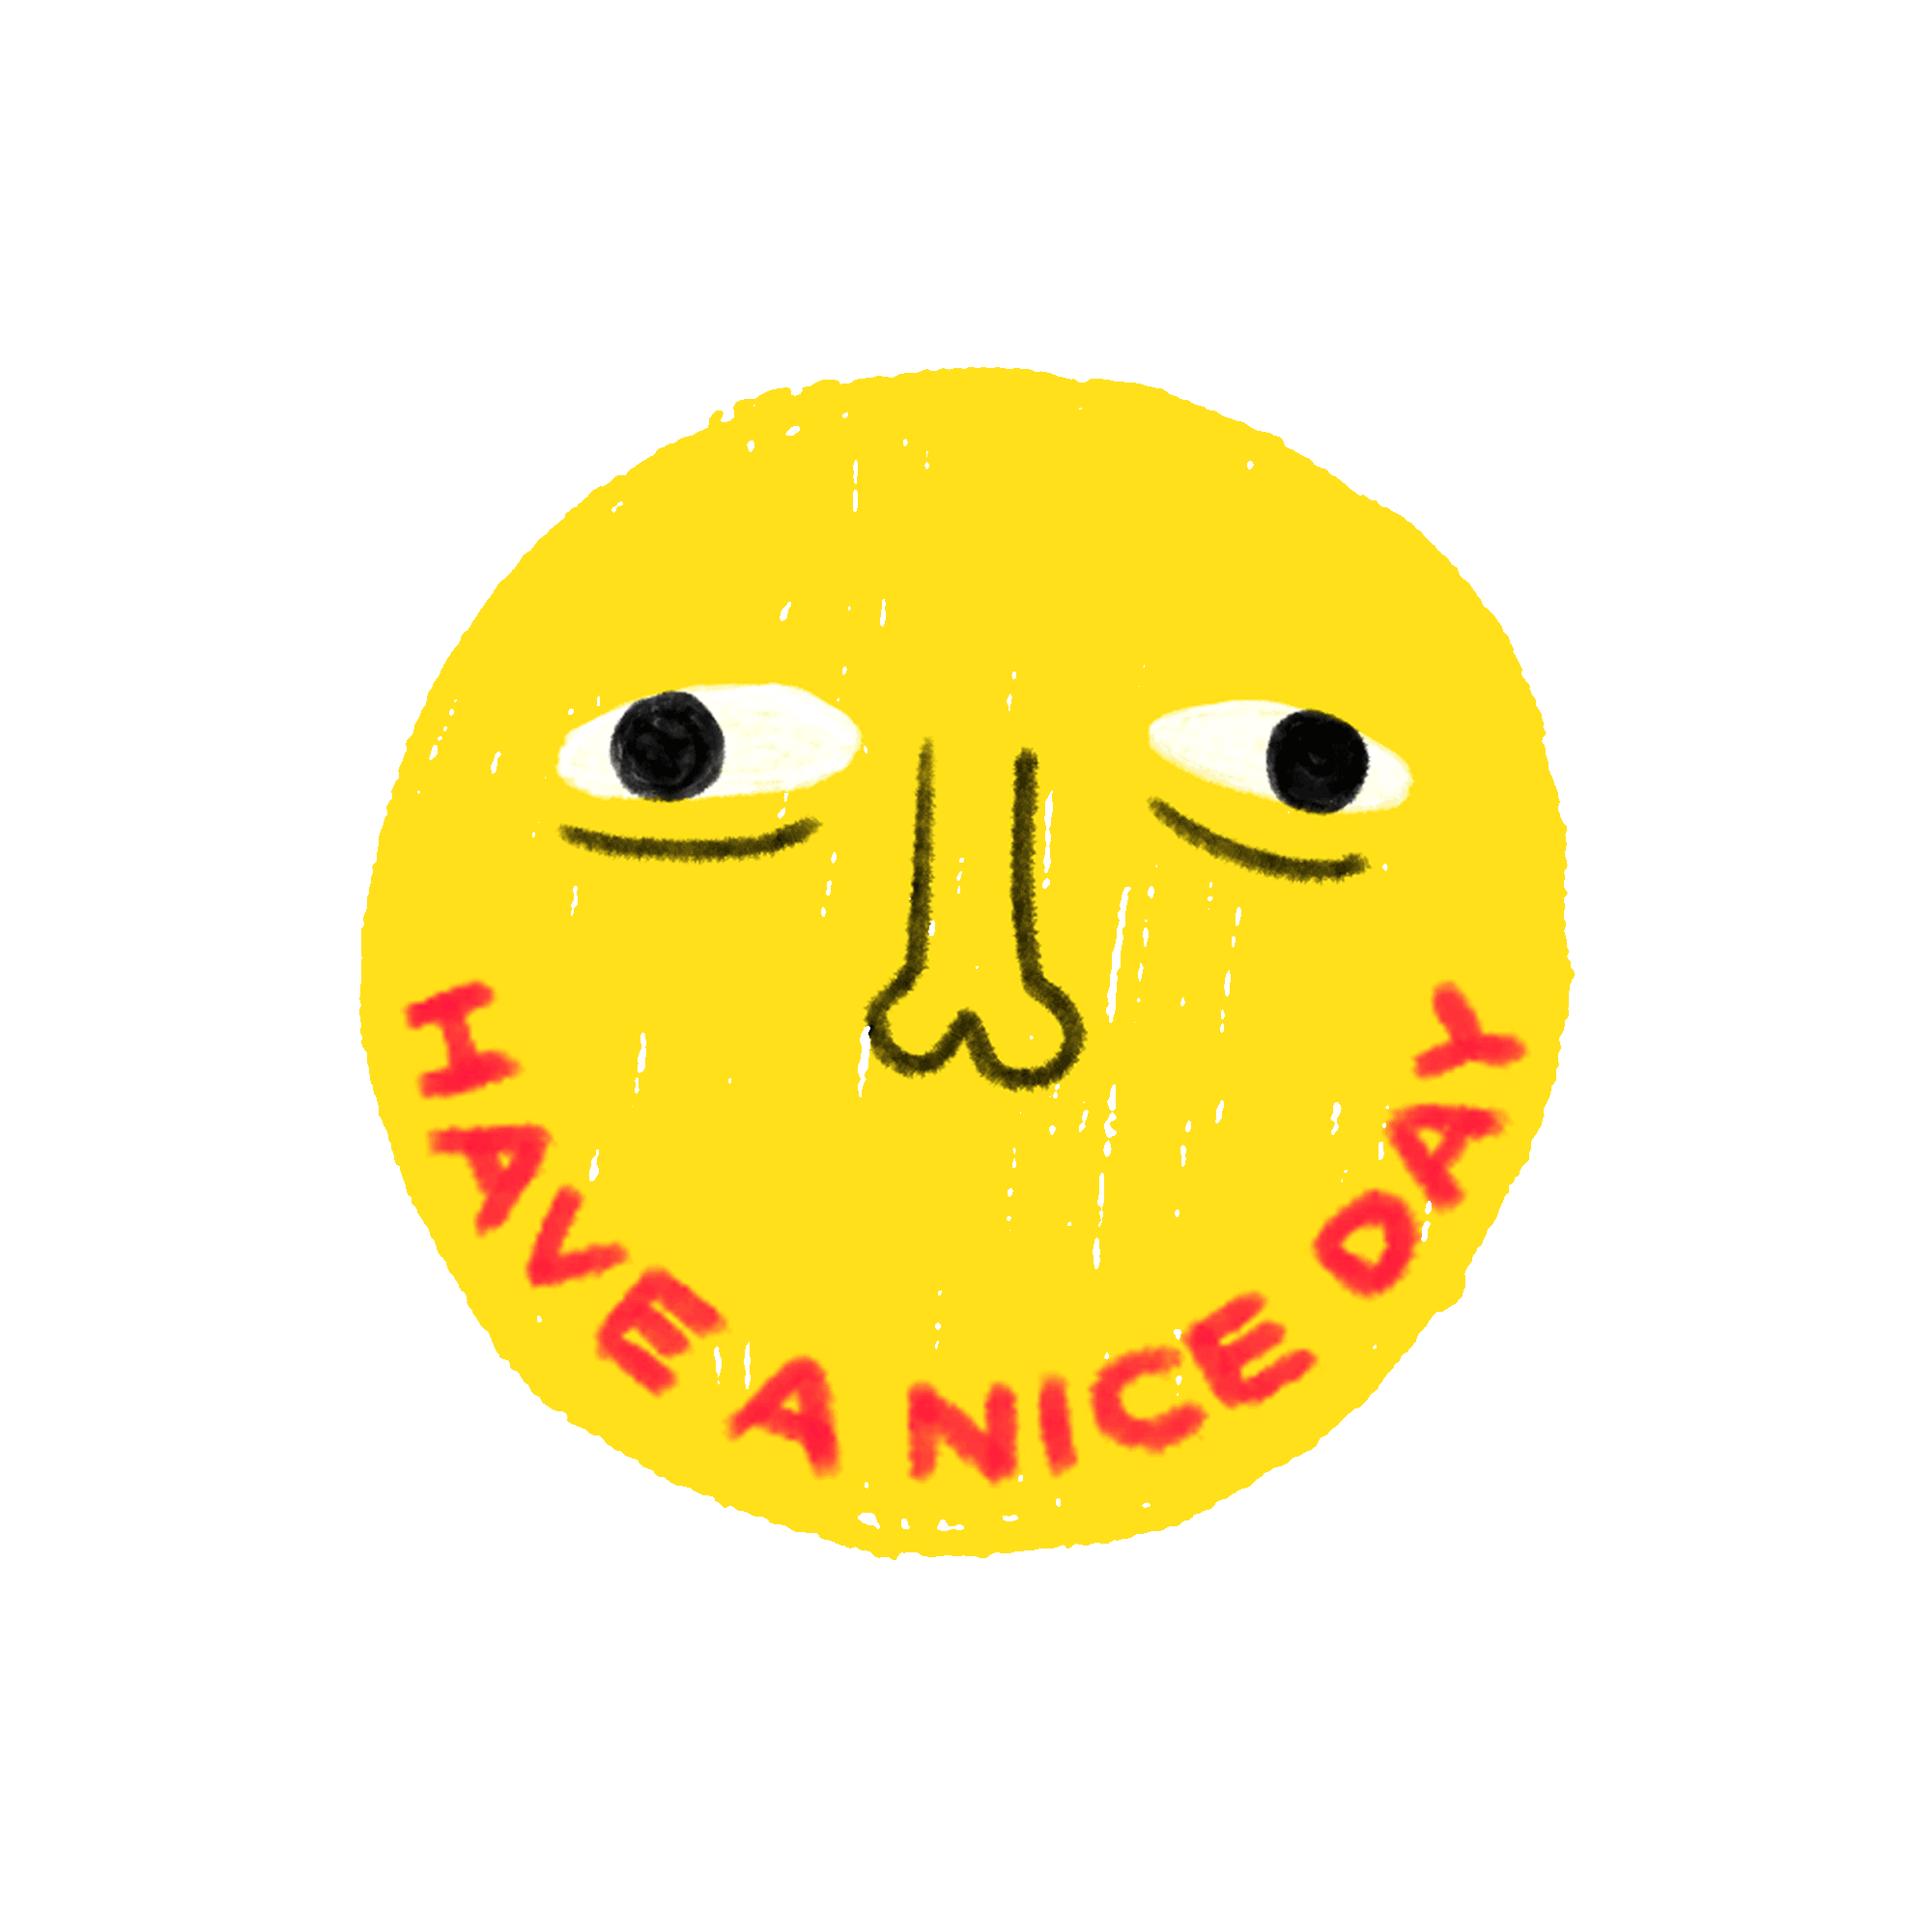 Animated GIF by Nicia Lam / Wontonicia, rotating smiley face with have a nice day written